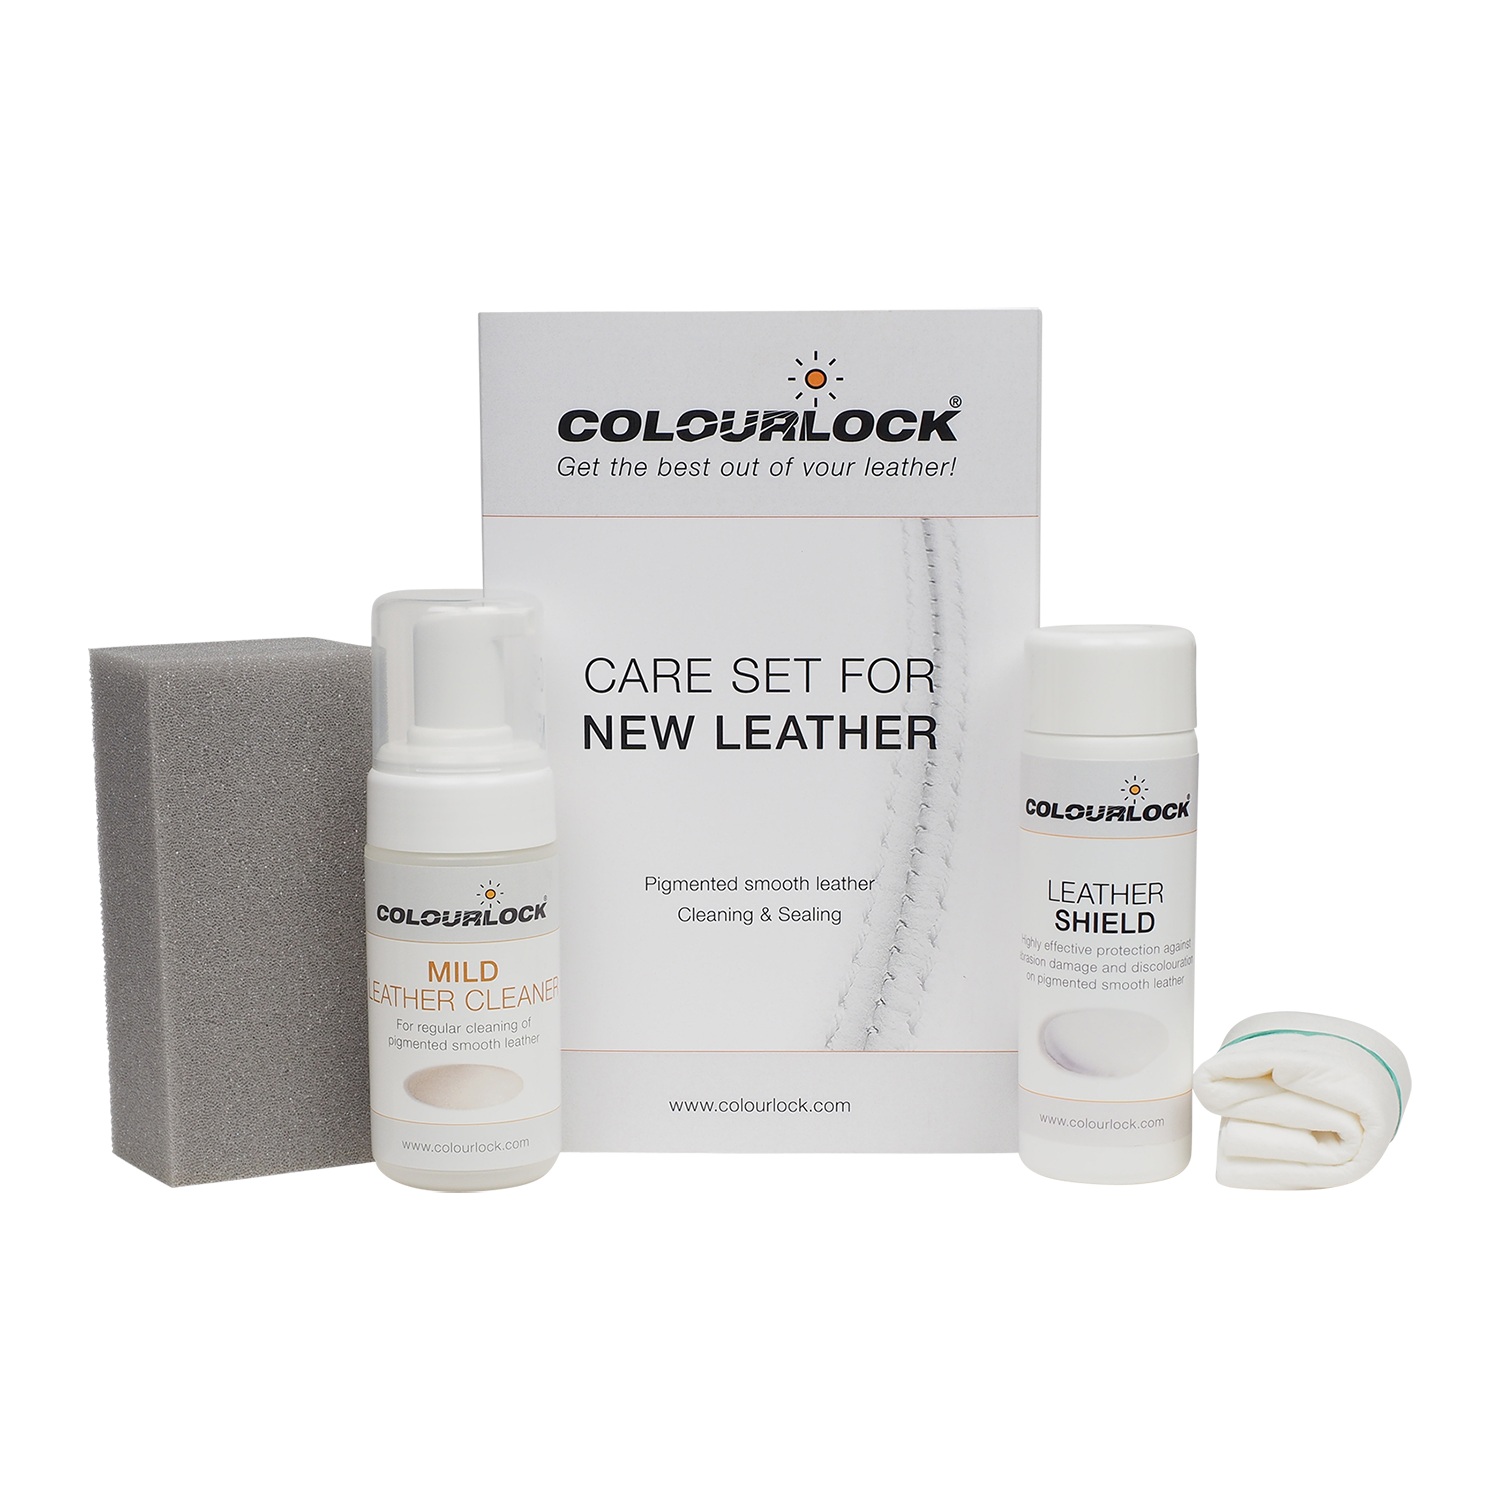 Colourlock Mild Leather Cleaner & Leather Shield Kit